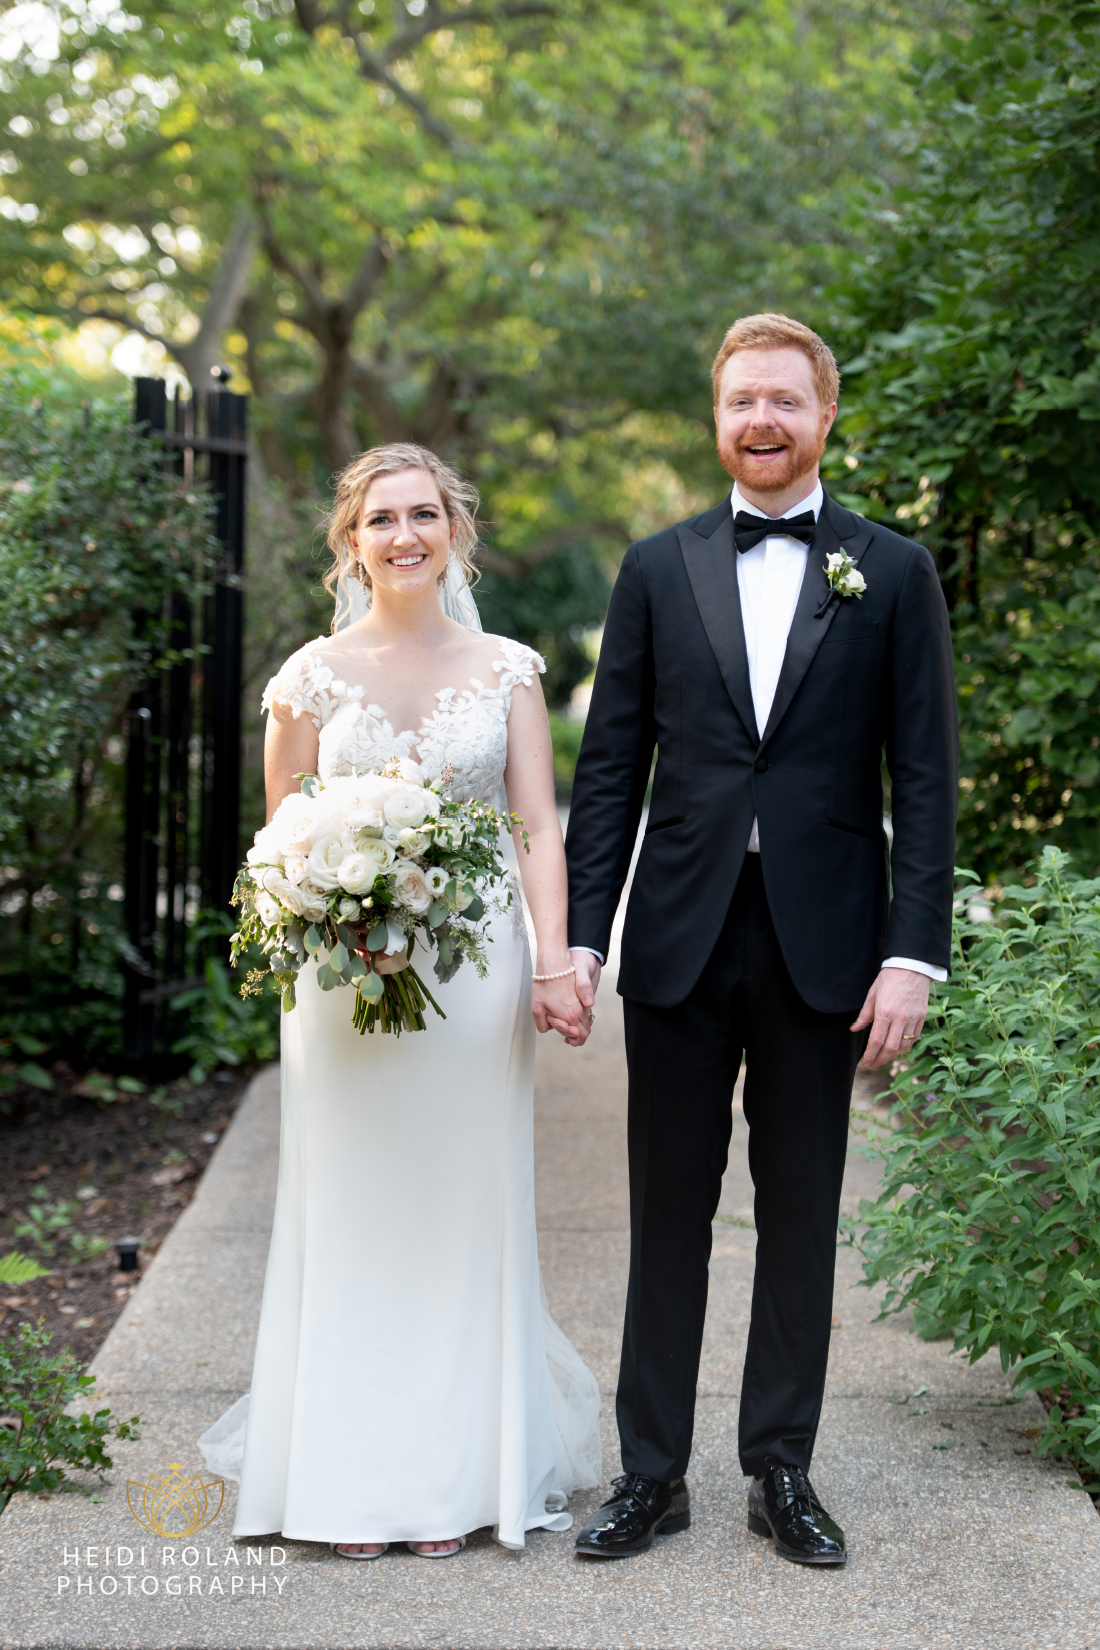 Bride and groom in walkway at Barnes Foundation on wedding day in Philly